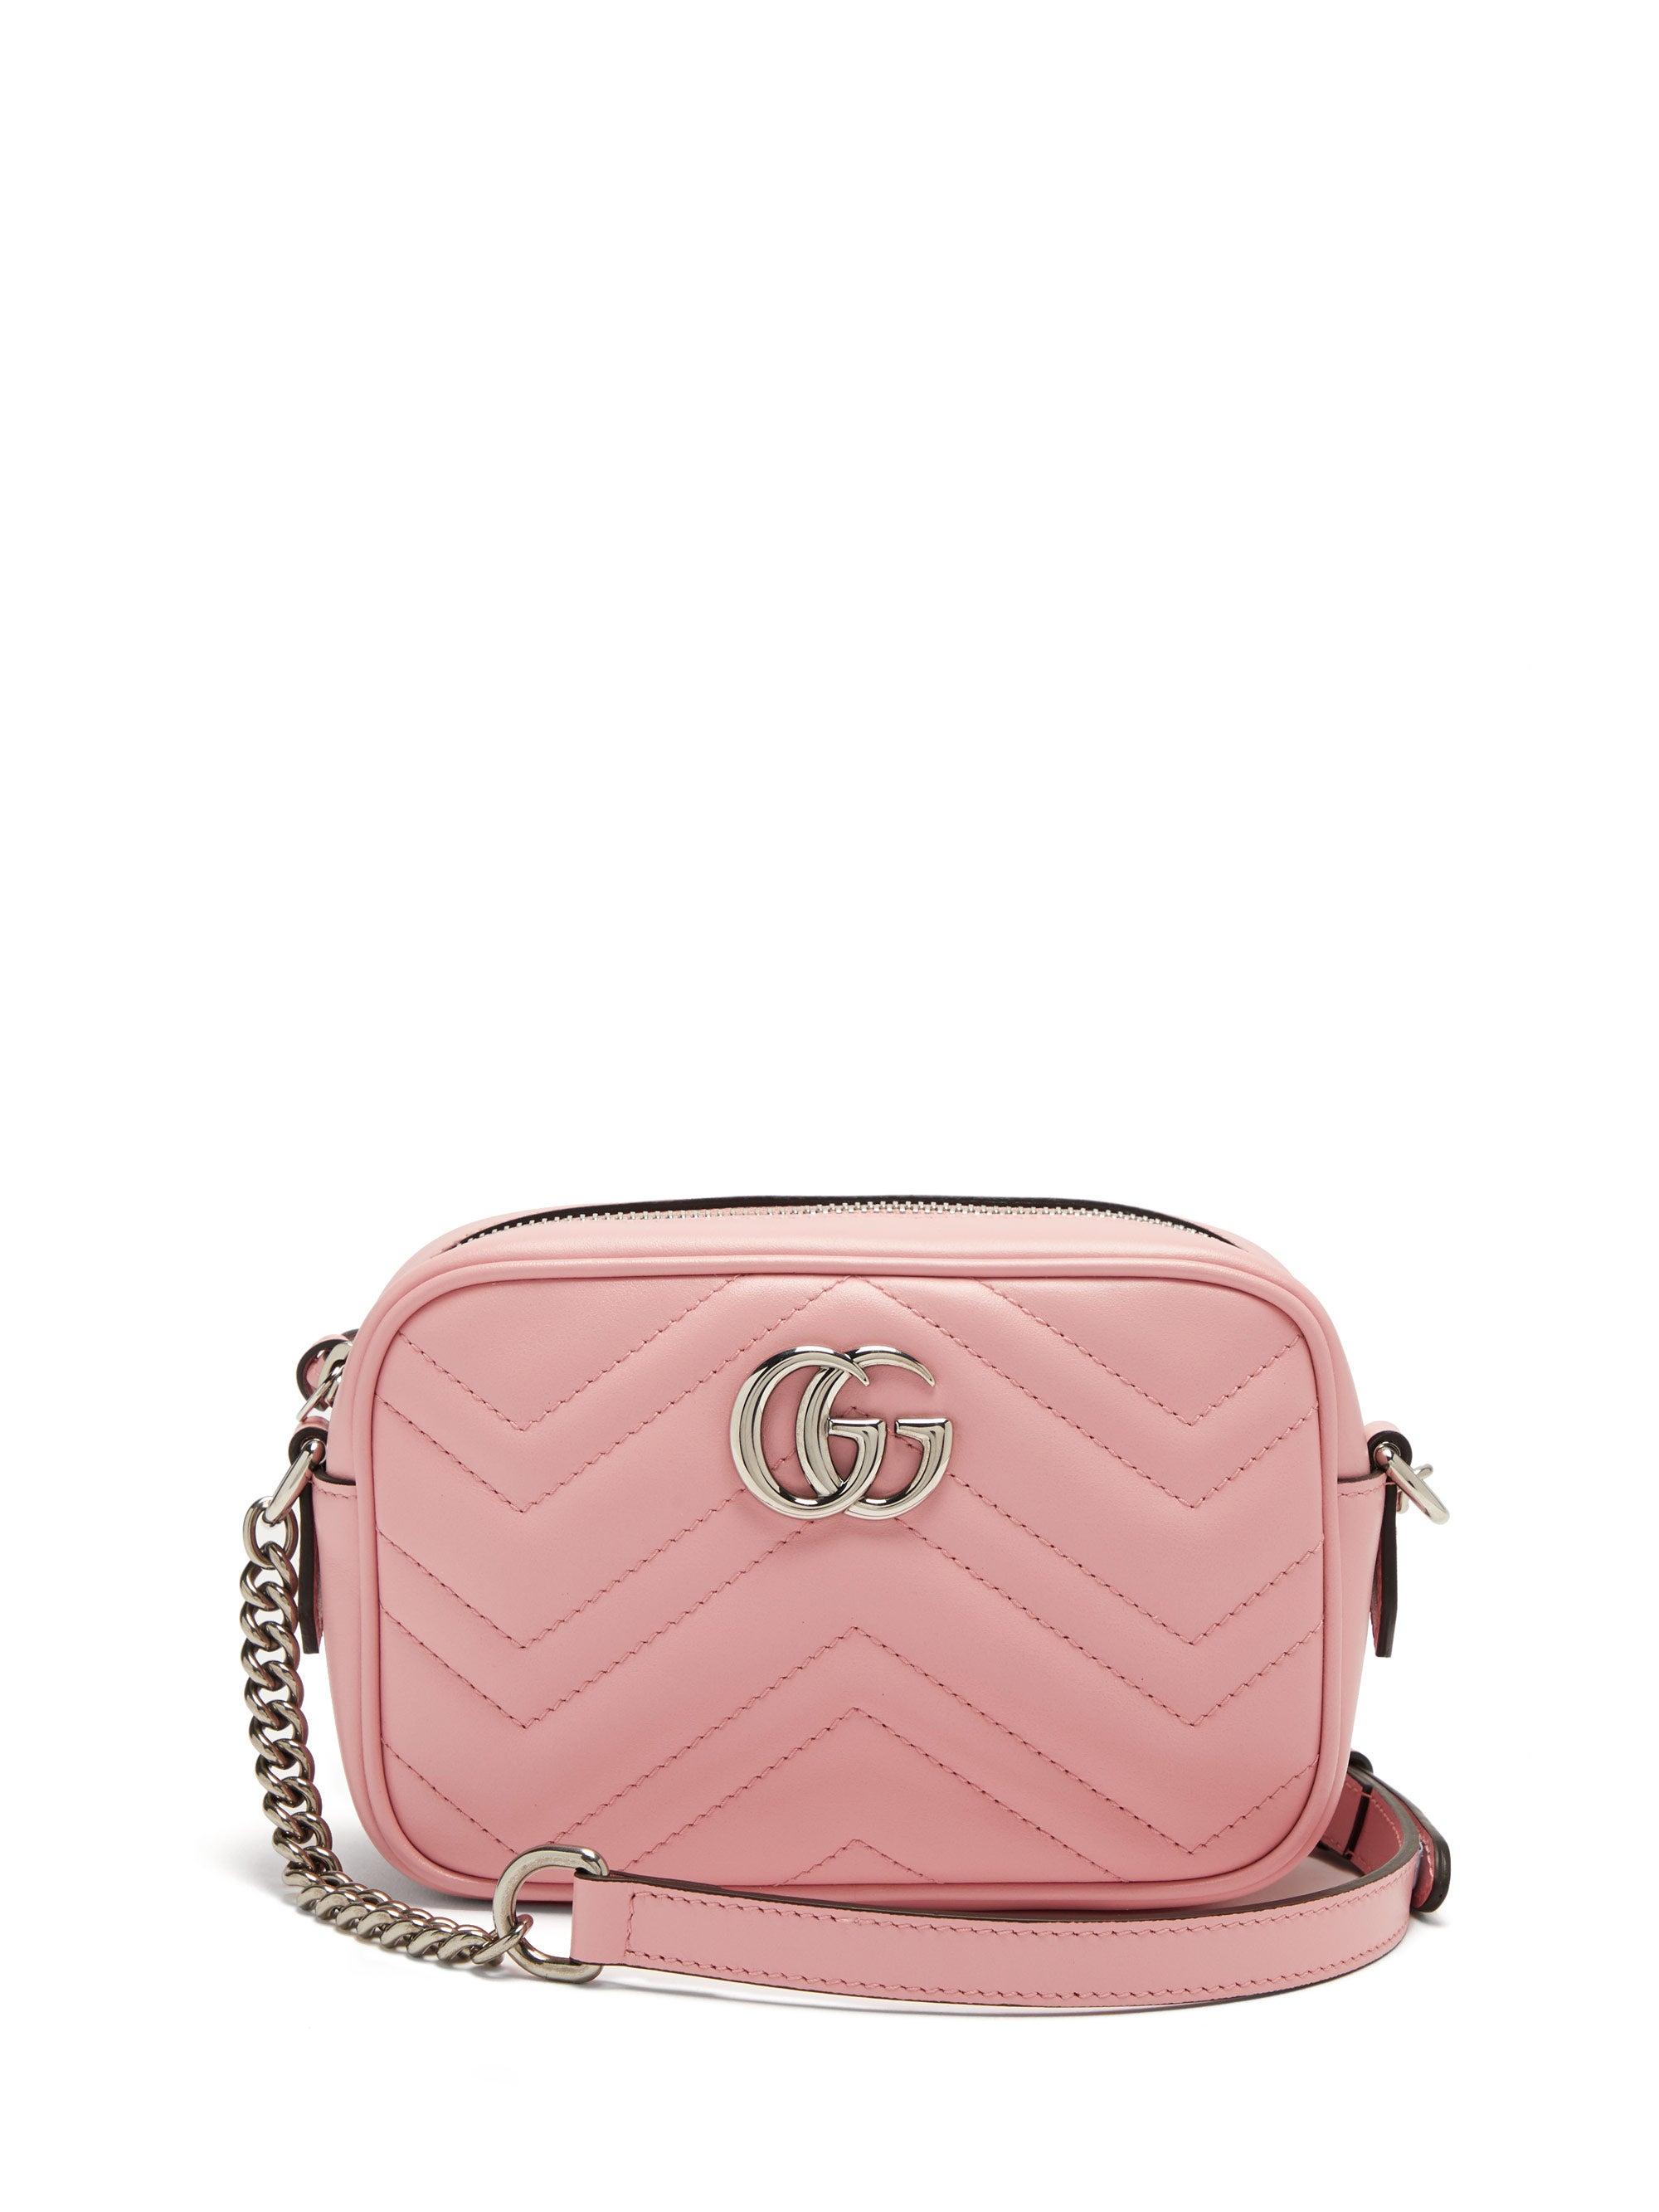 Gucci GG Marmont Mini Quilted-leather Cross-body Bag in Pink - Lyst